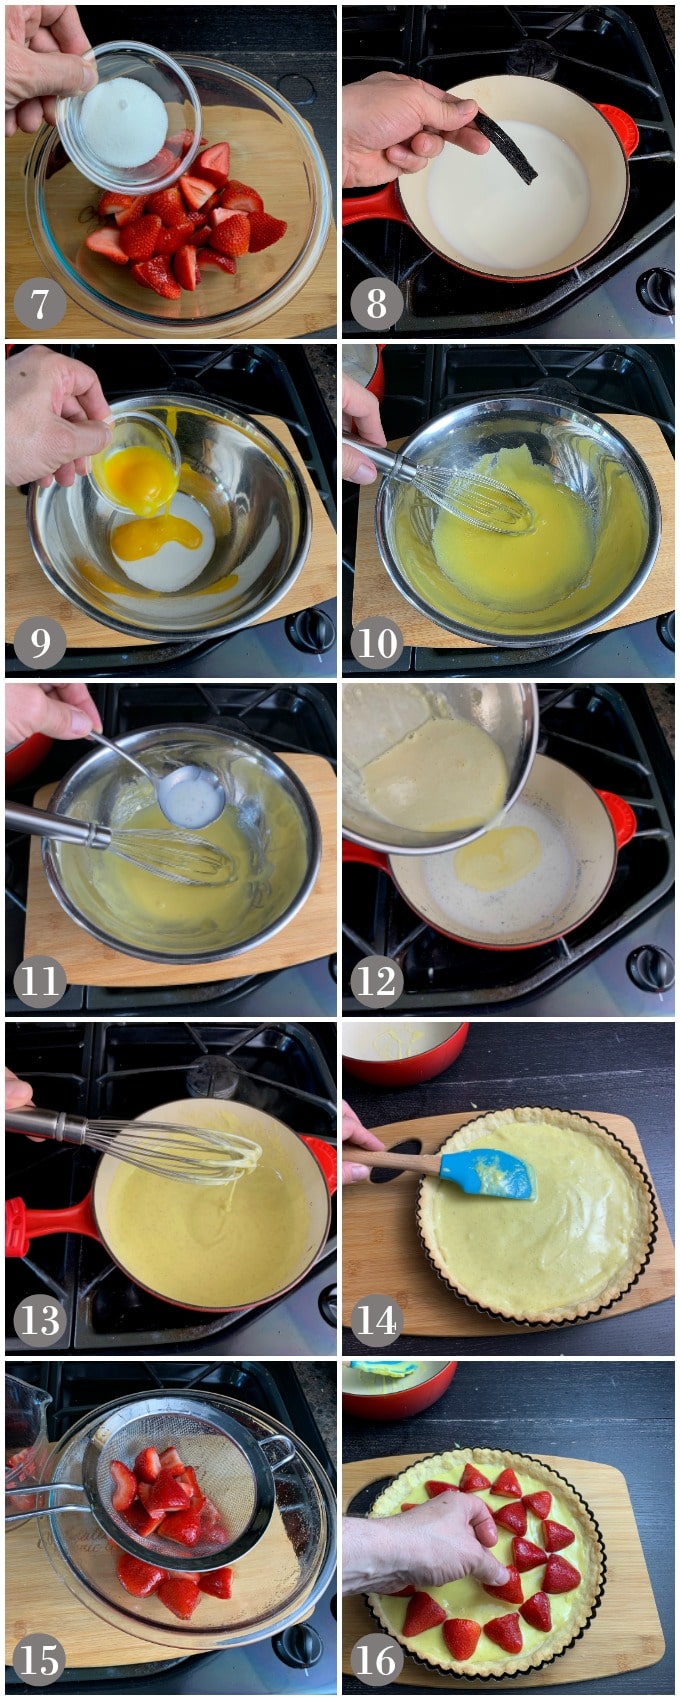 A collage of photos showing steps to make vanilla custard and filling it into a tart shell with strawberries on top.